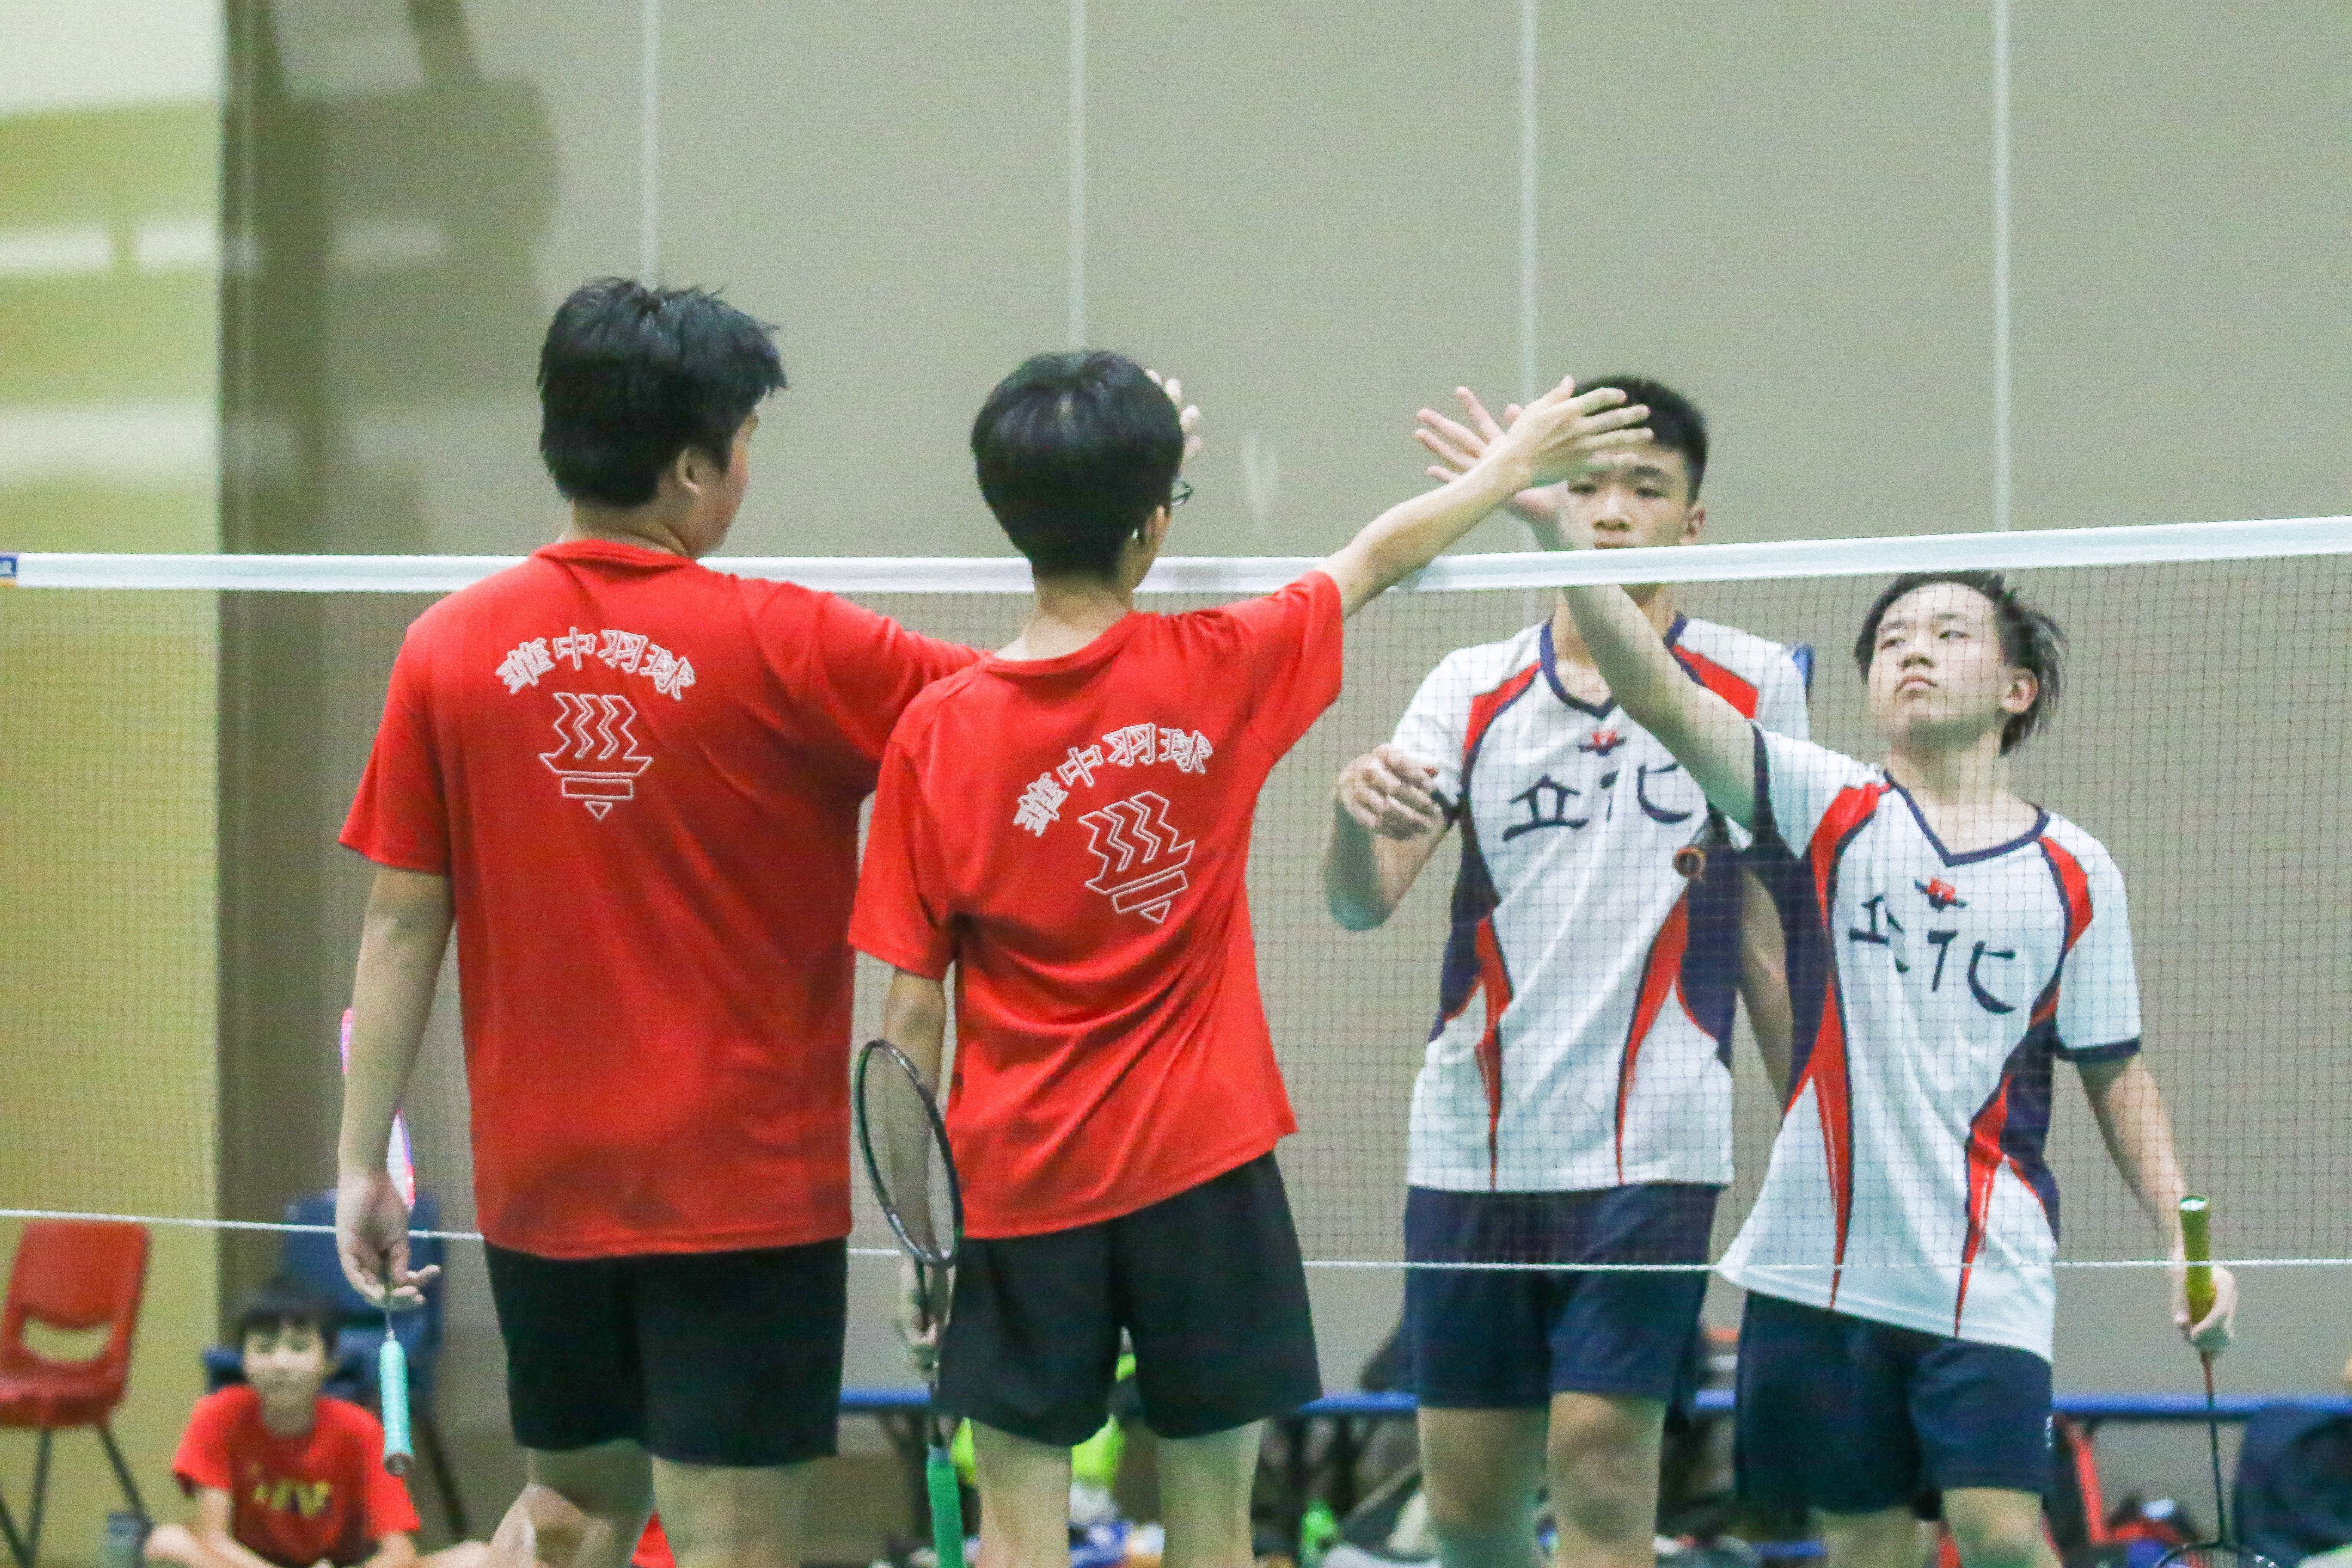 NSG 2023 Badminton : Fuhua Secondary and Hwa Chong Institution, Advance to West Zone C Division Final!